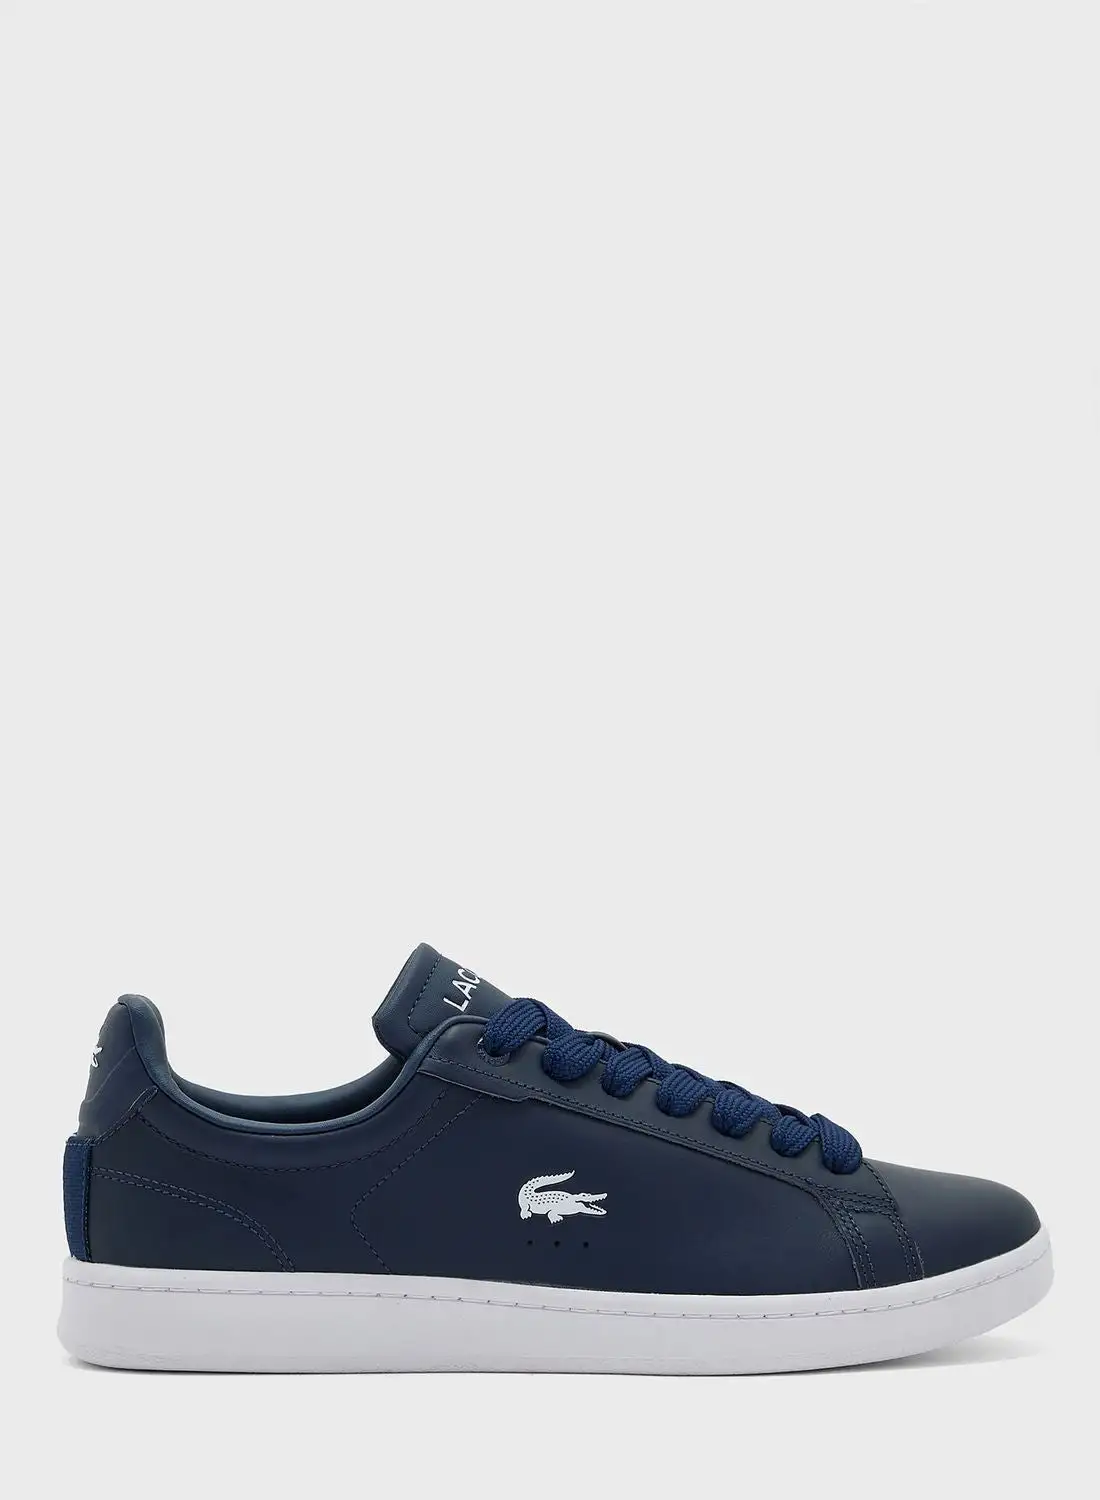 LACOSTE Carnaby Lace Up Sneakers